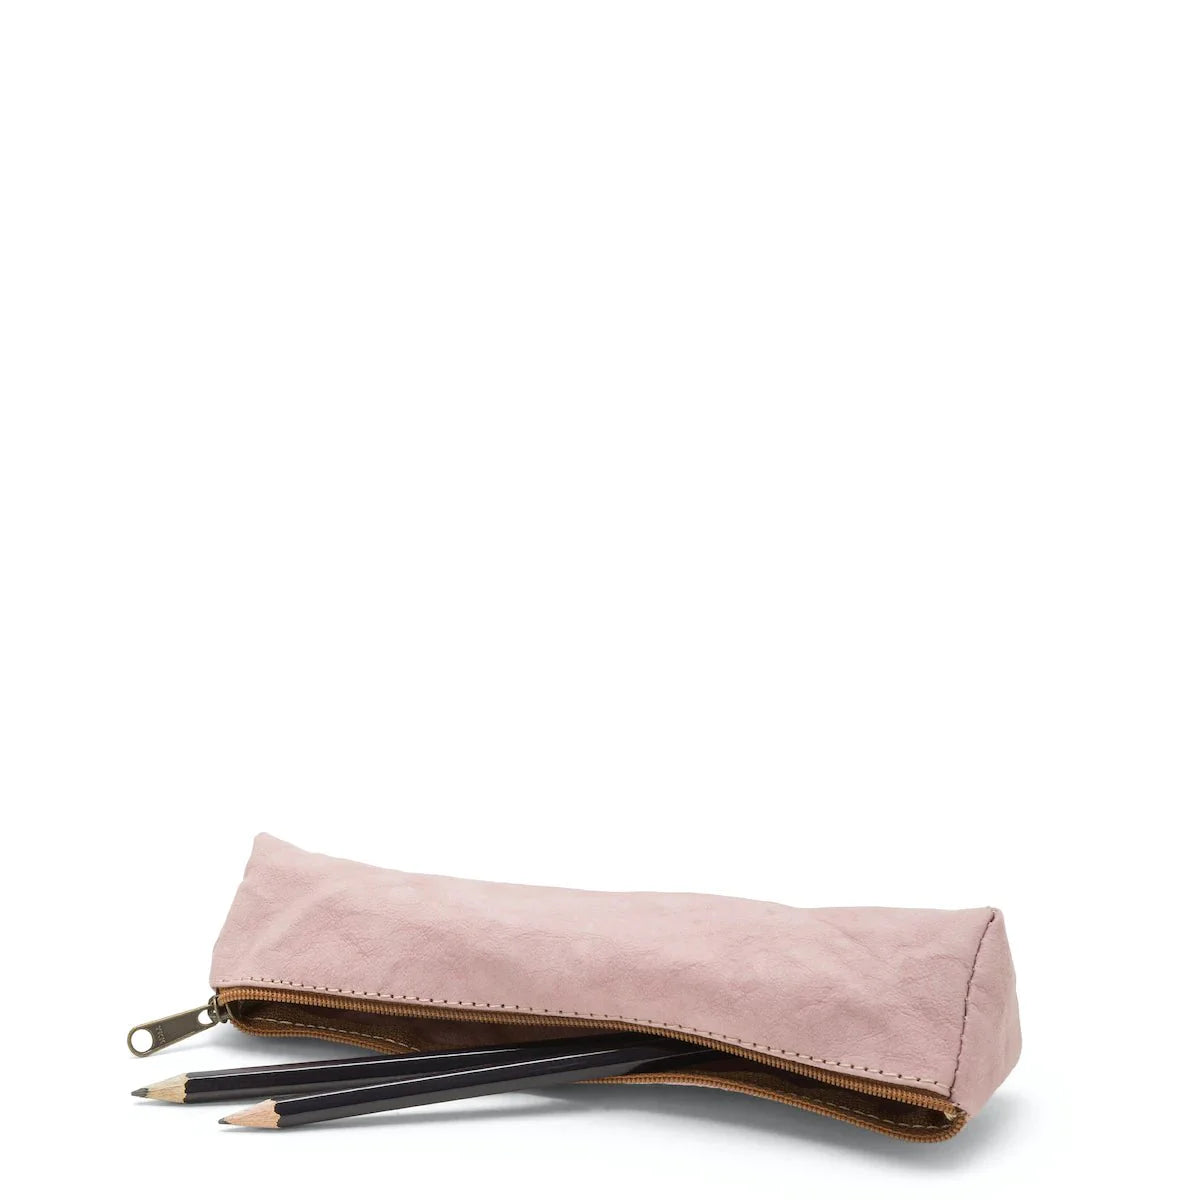 A washable paper pencil case is shown on its side with two pencils spilling out. The pencil case is pale pink in colour and has a metal zip closure.